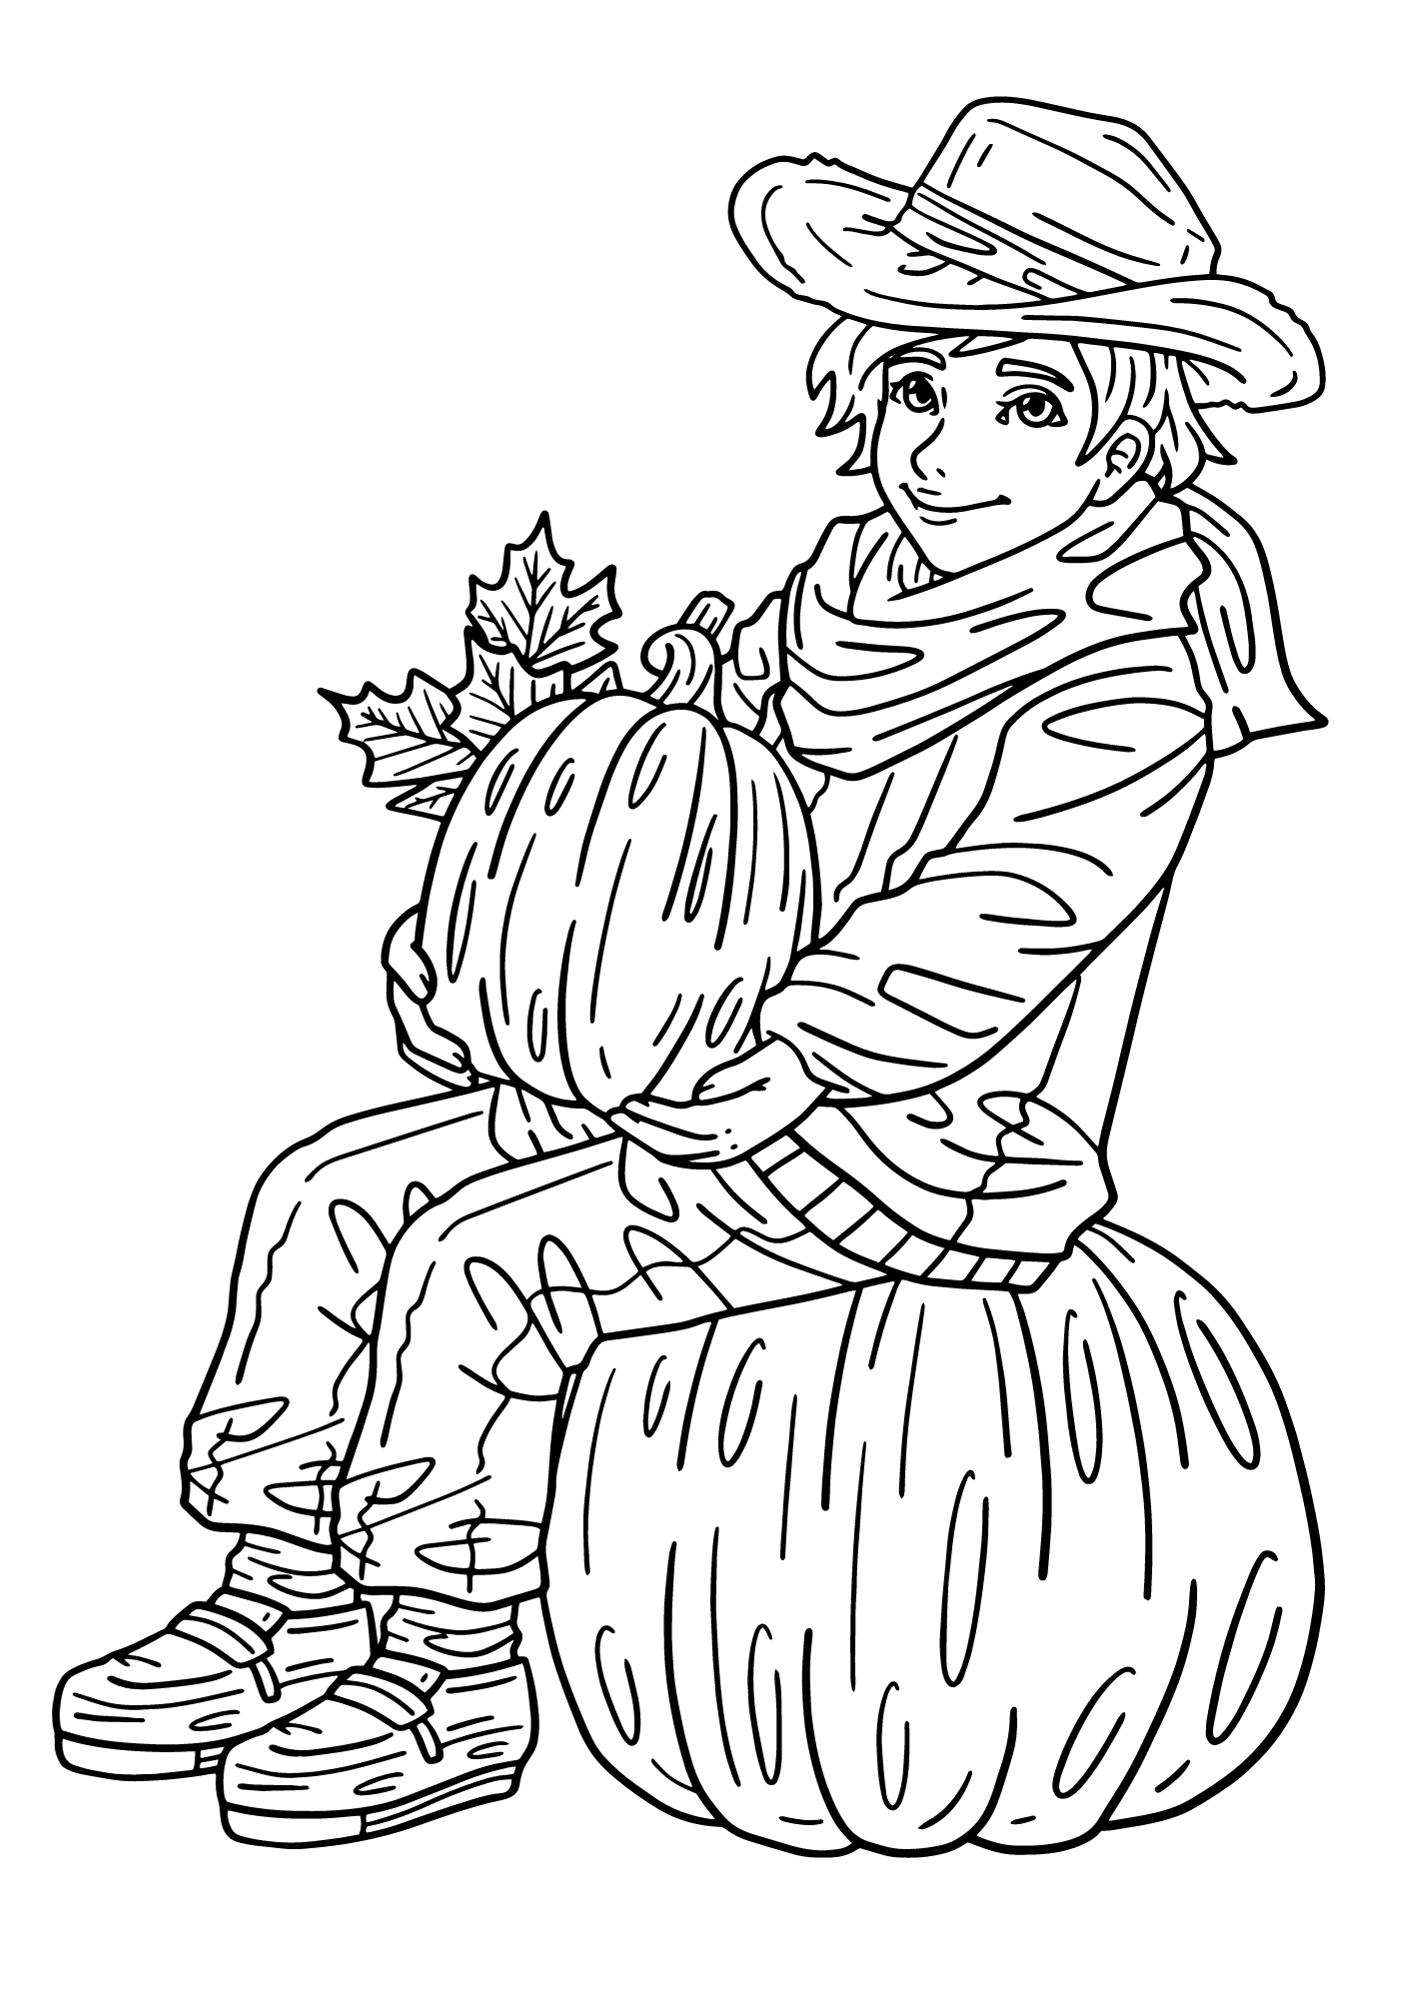 Thanksgiving Fruit For Children Coloring Page